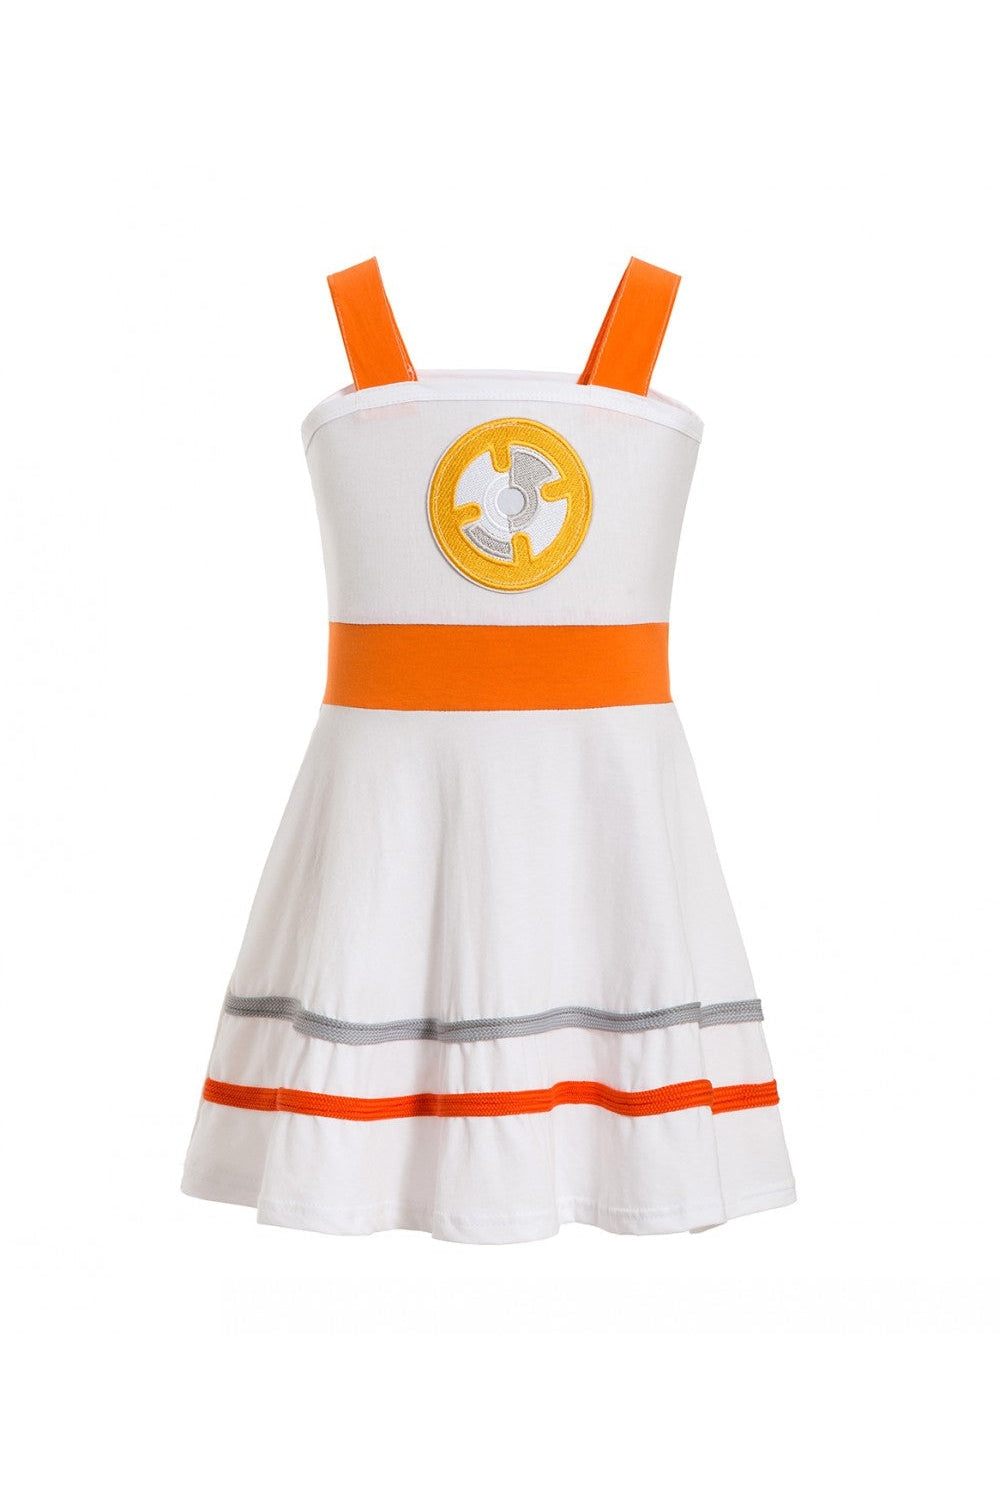 Inspired Fancy Dress - Let their imagination be free - BB-8